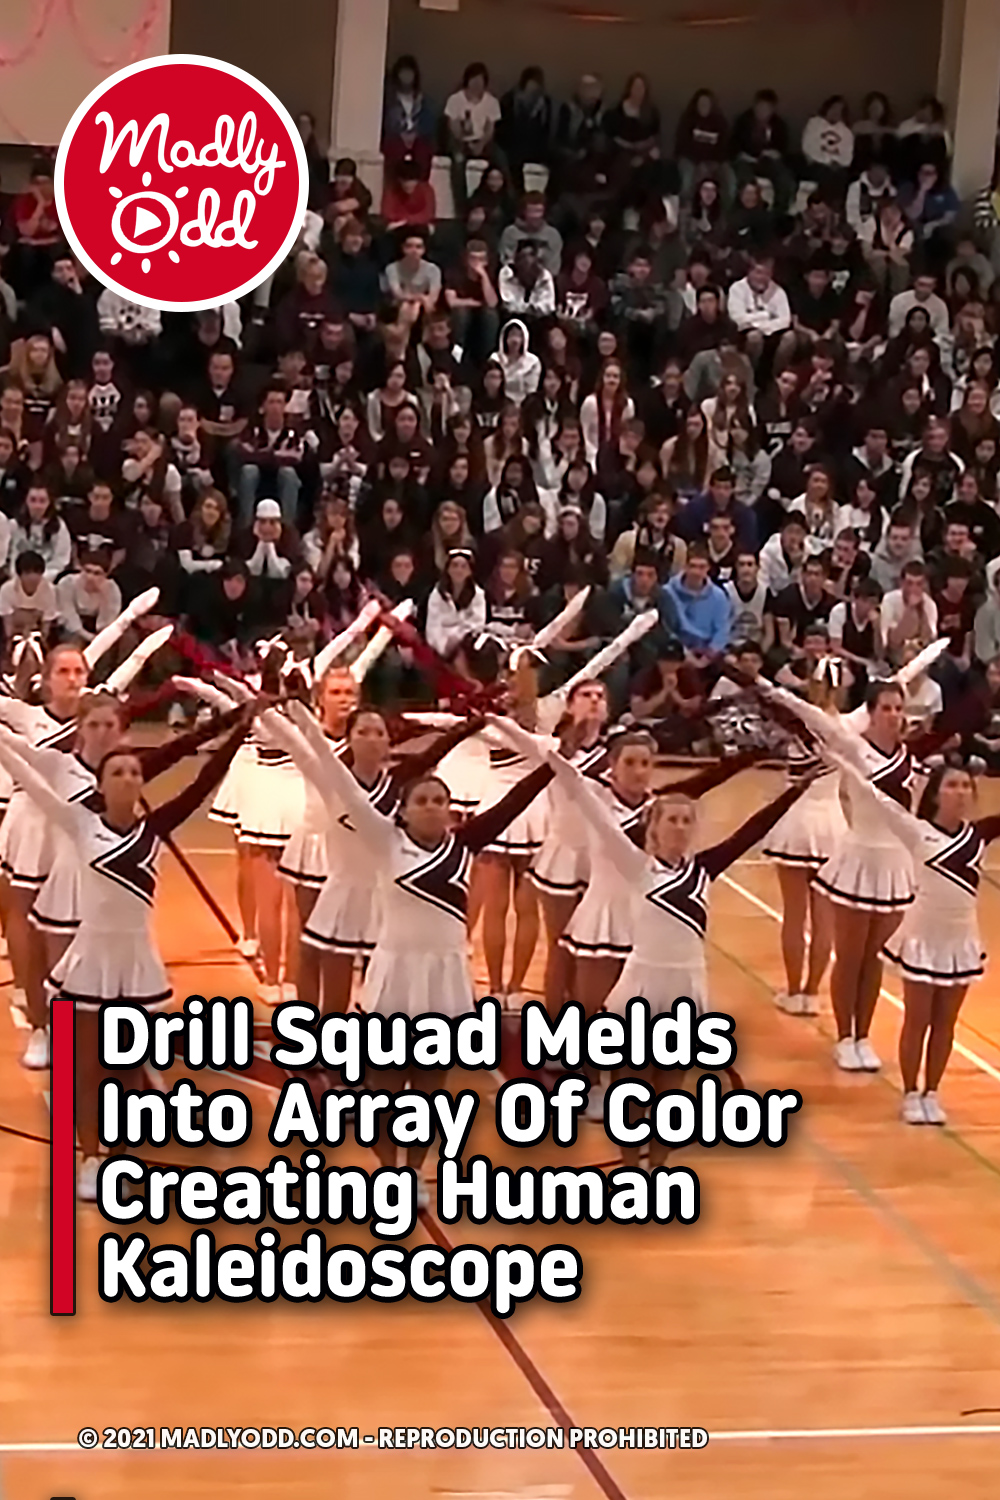 Drill Squad Melds Into Array Of Color Creating Human Kaleidoscope